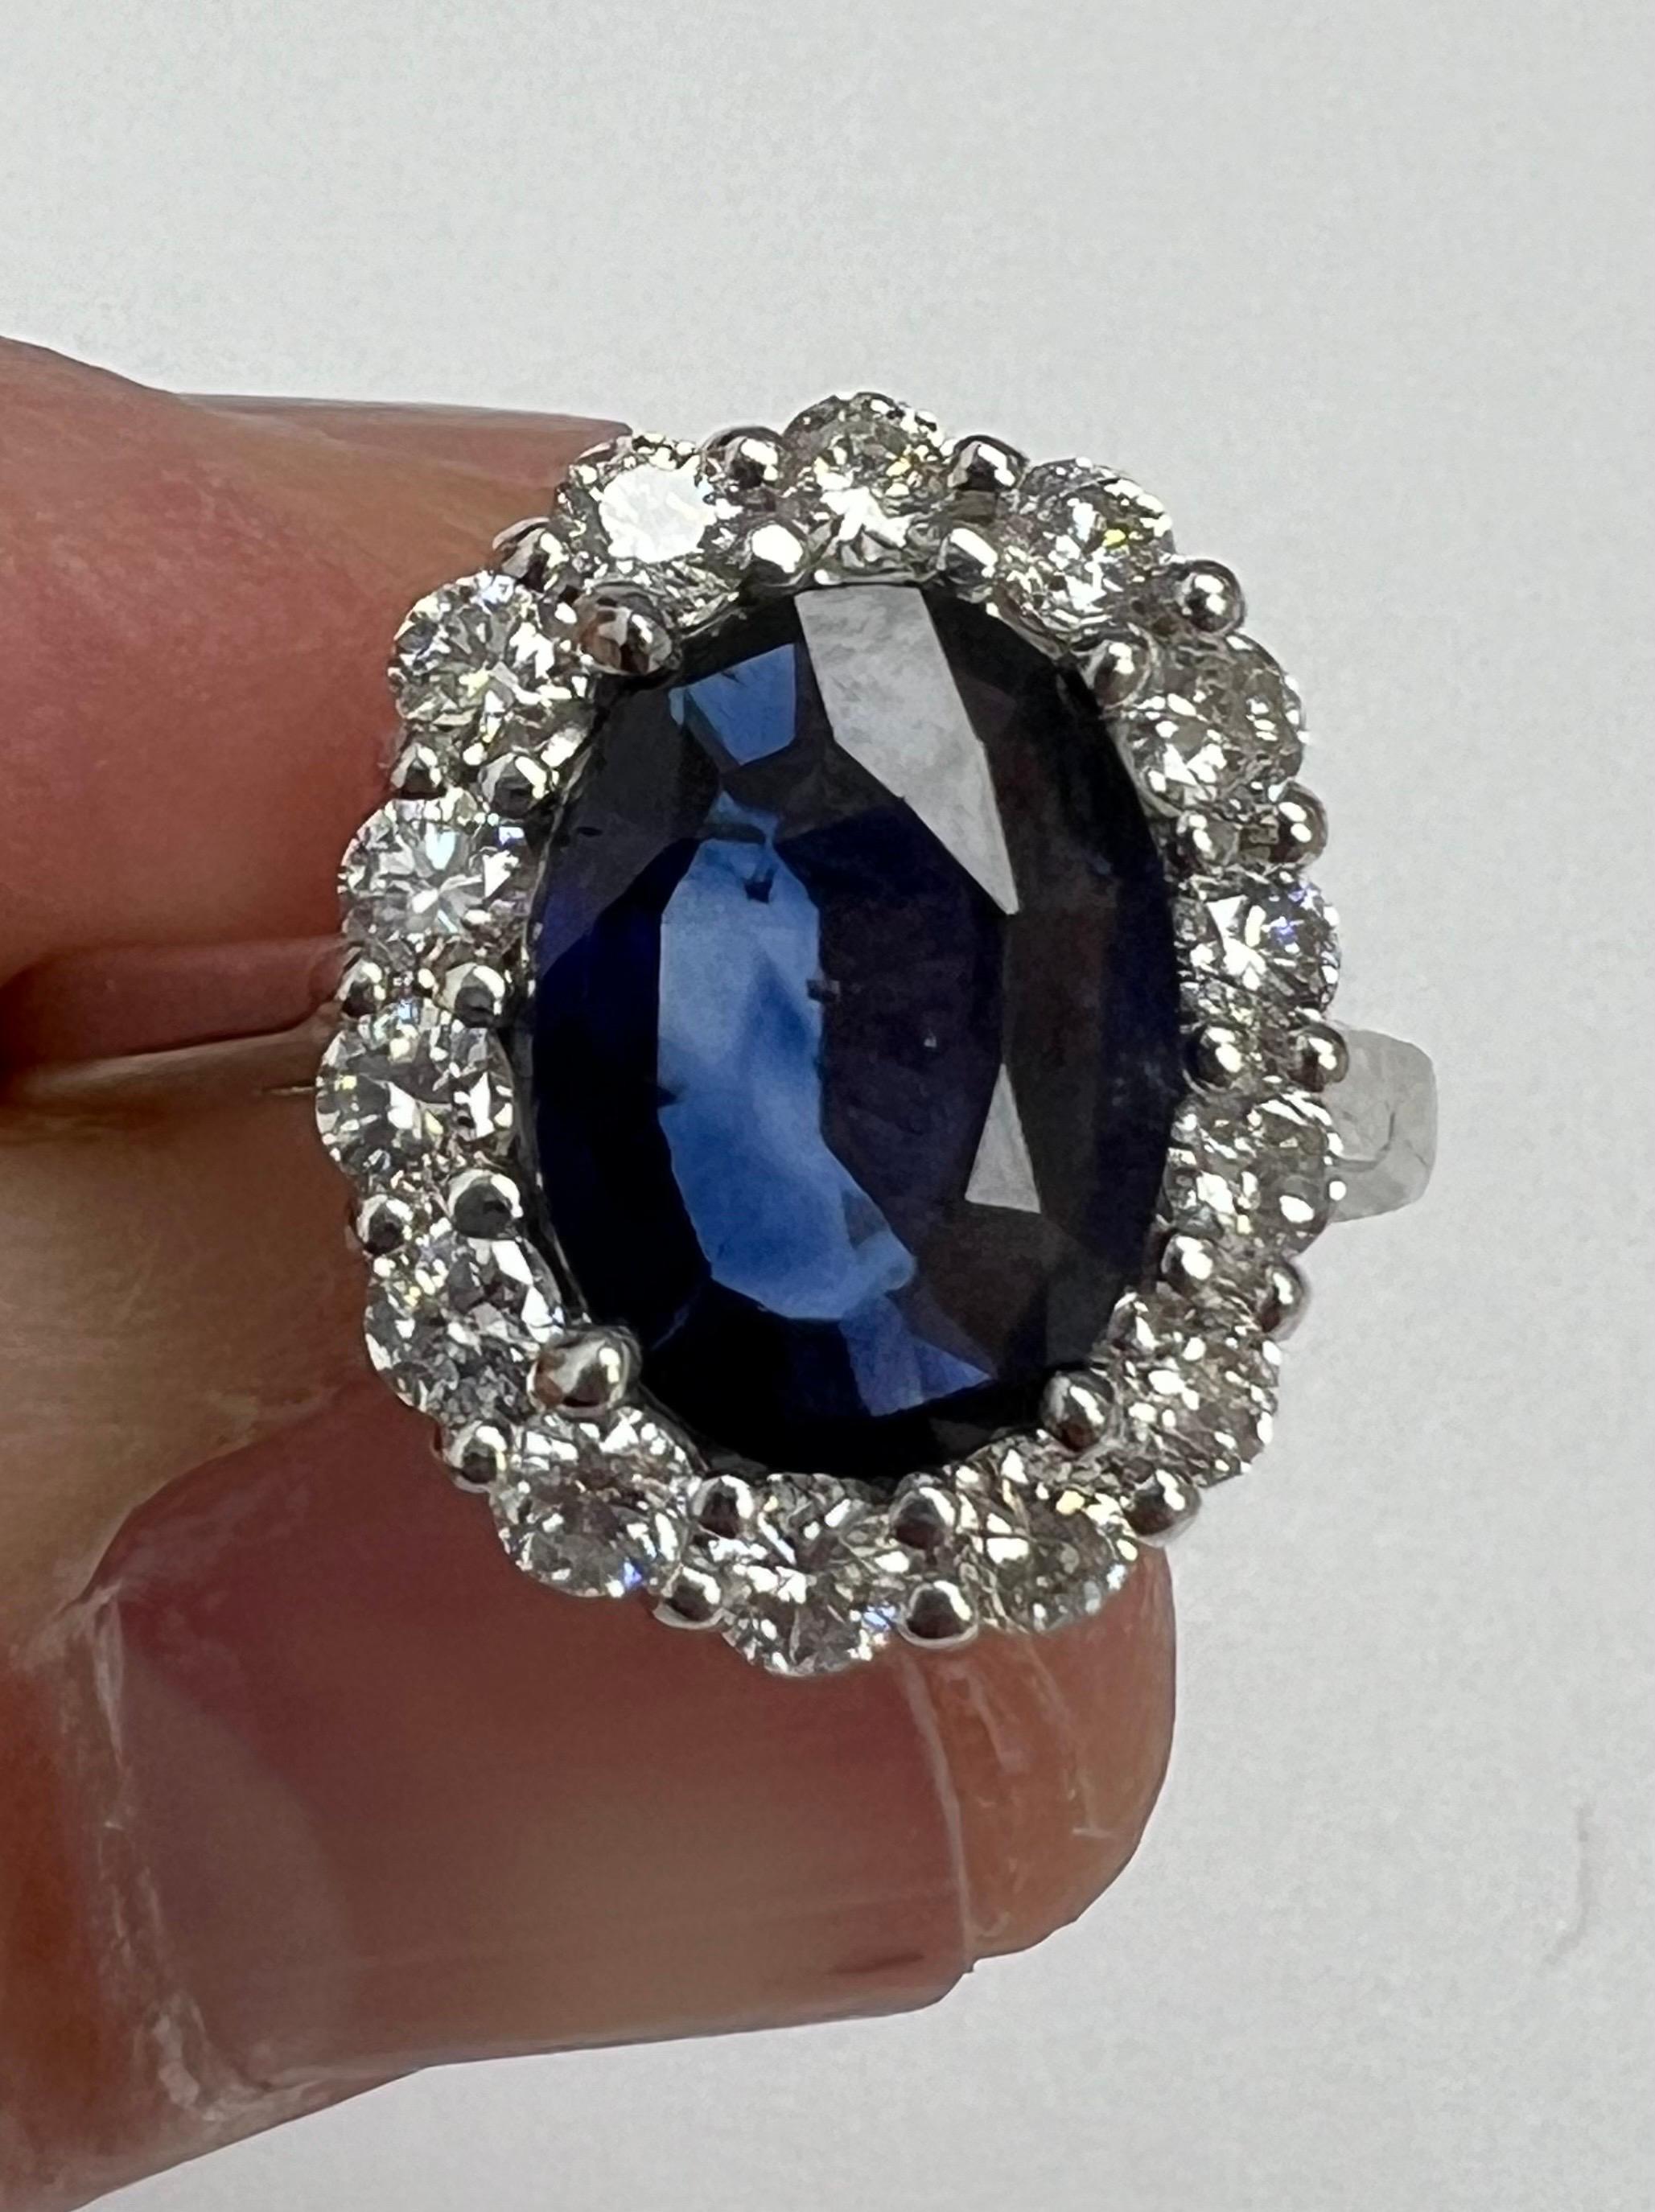 Brilliant Cut Natural Blue Sapphire Diamond Ring in 18k White Gold - Lady D Style For Sale